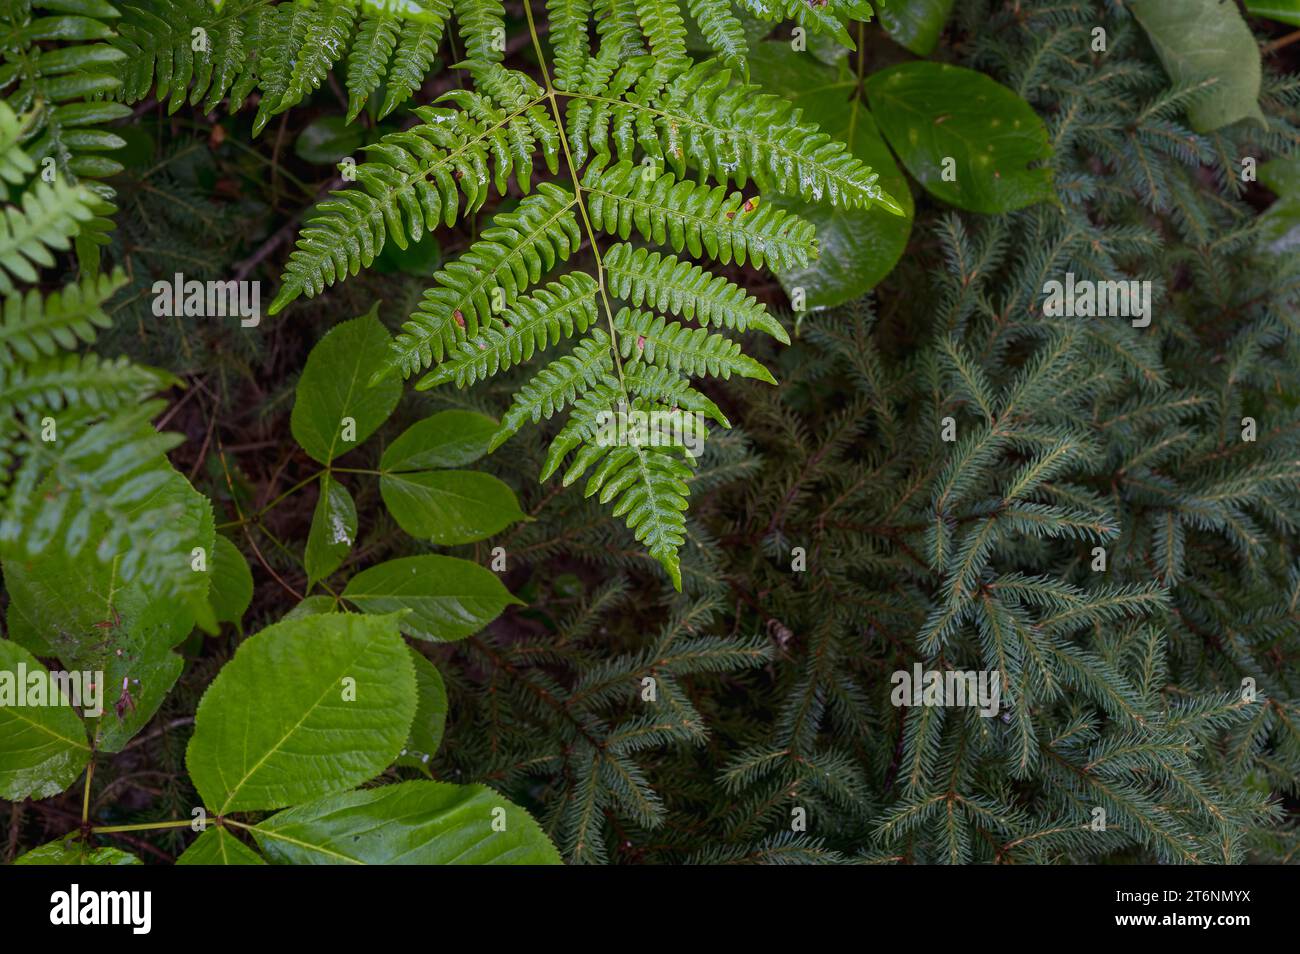 A close up of a green plant with lots of leaves Stock Photo